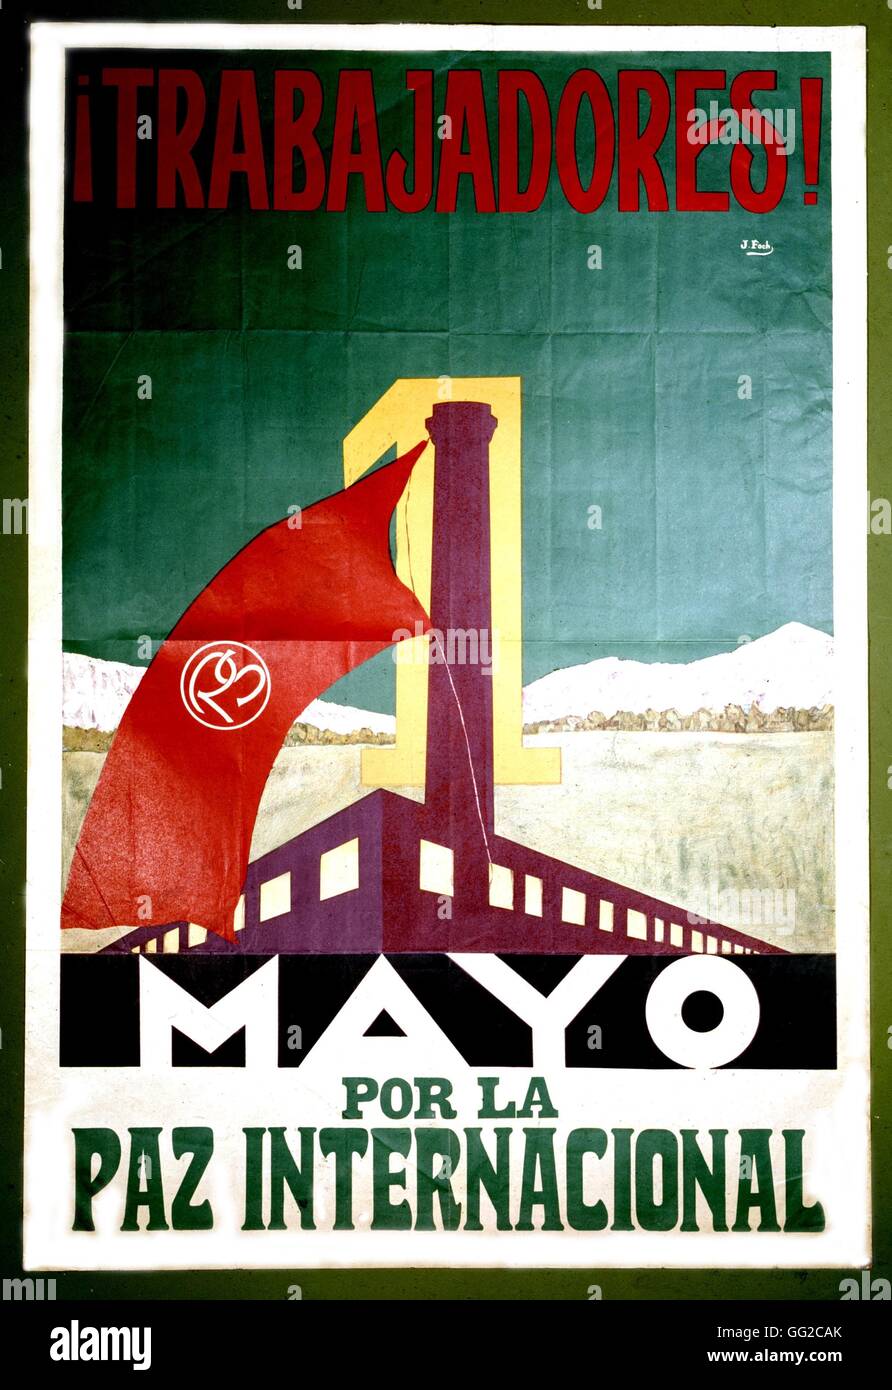 Socialist poster socialiste calling Latin-American workers to devote May Day to peace c.1930 Latin America Amsterdam. Institute for history Stock Photo